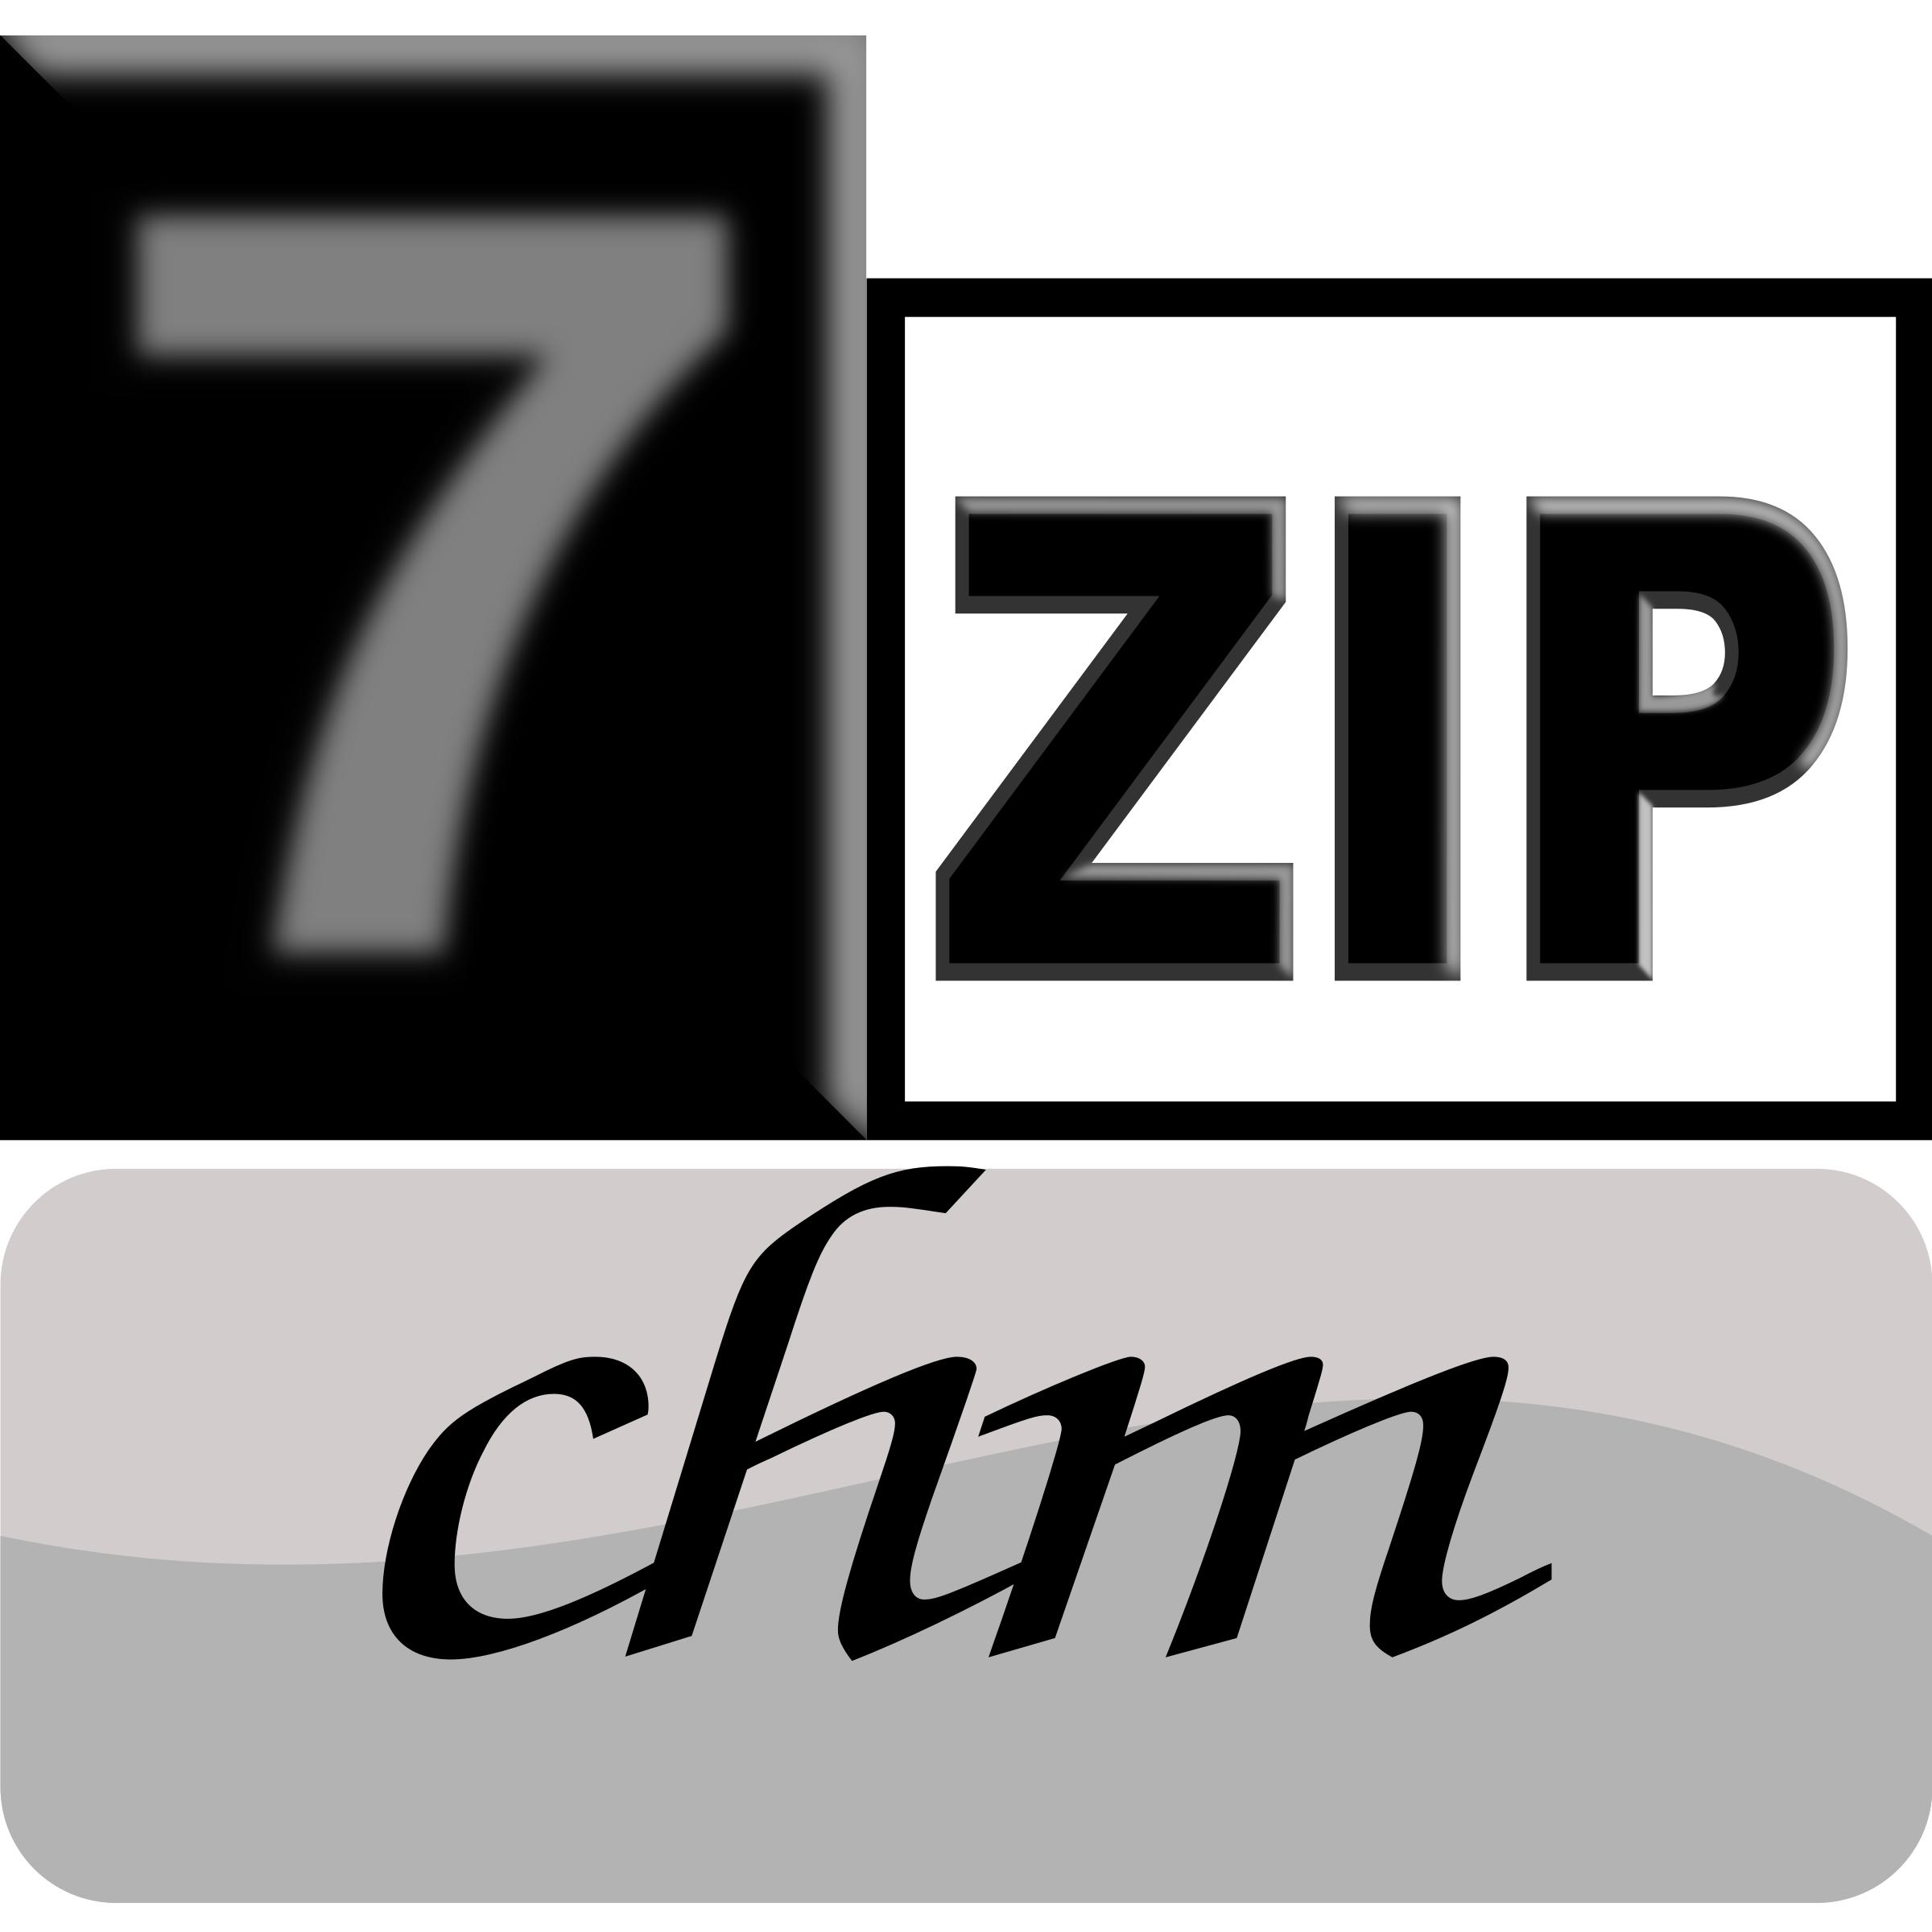 7zipClassic-chm PNG icons